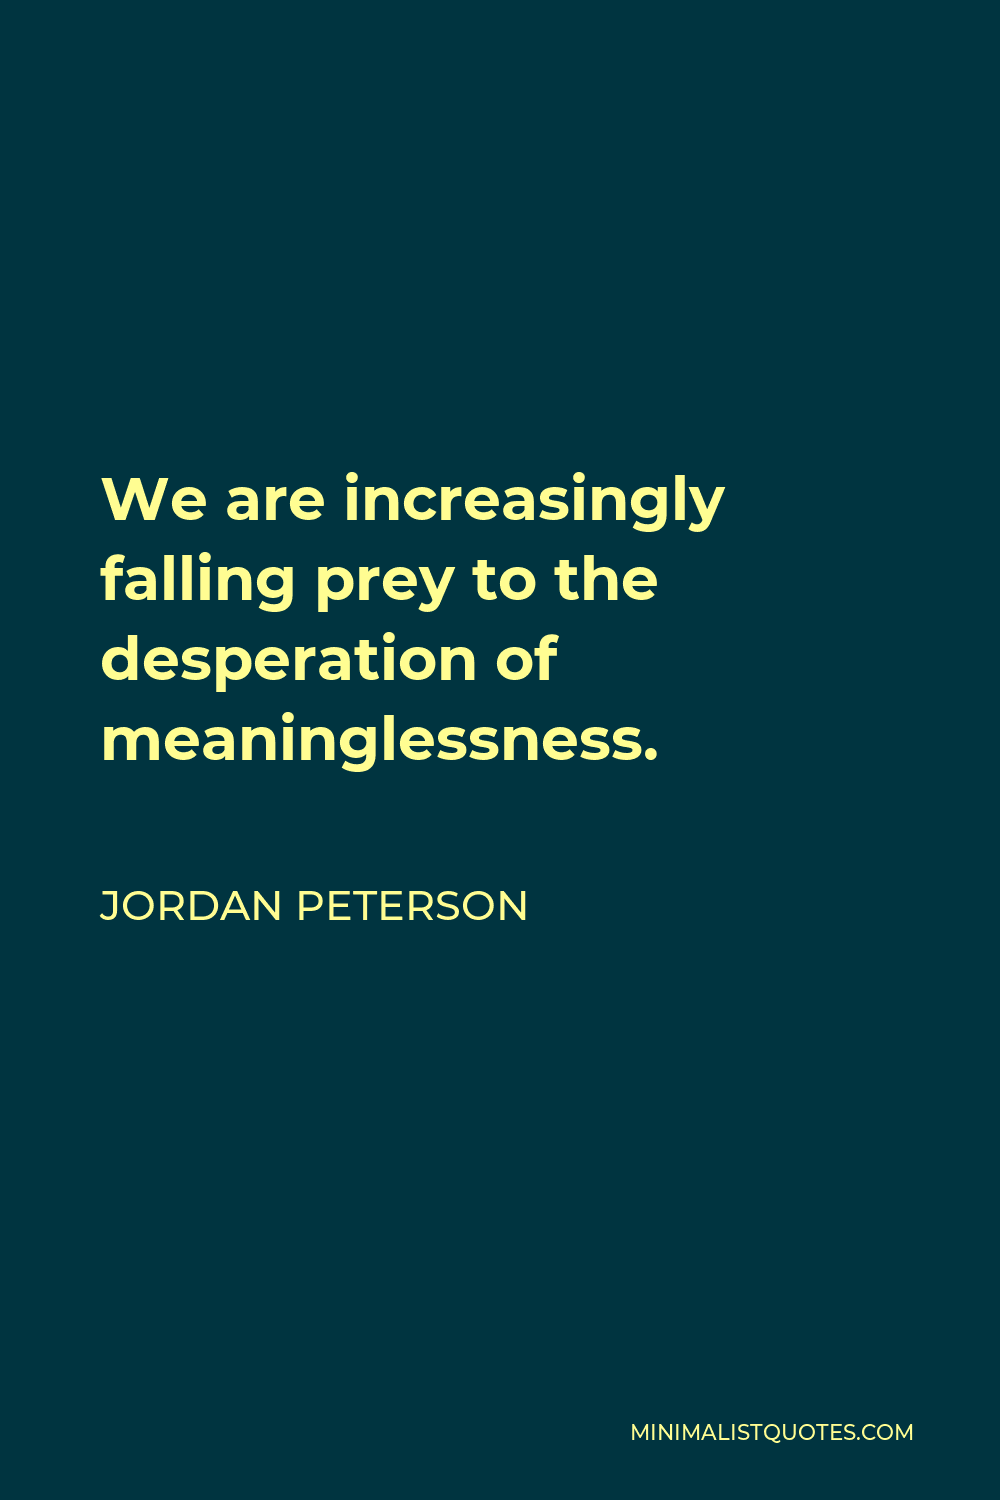 Jordan Peterson Quote - We are increasingly falling prey to the desperation of meaninglessness.